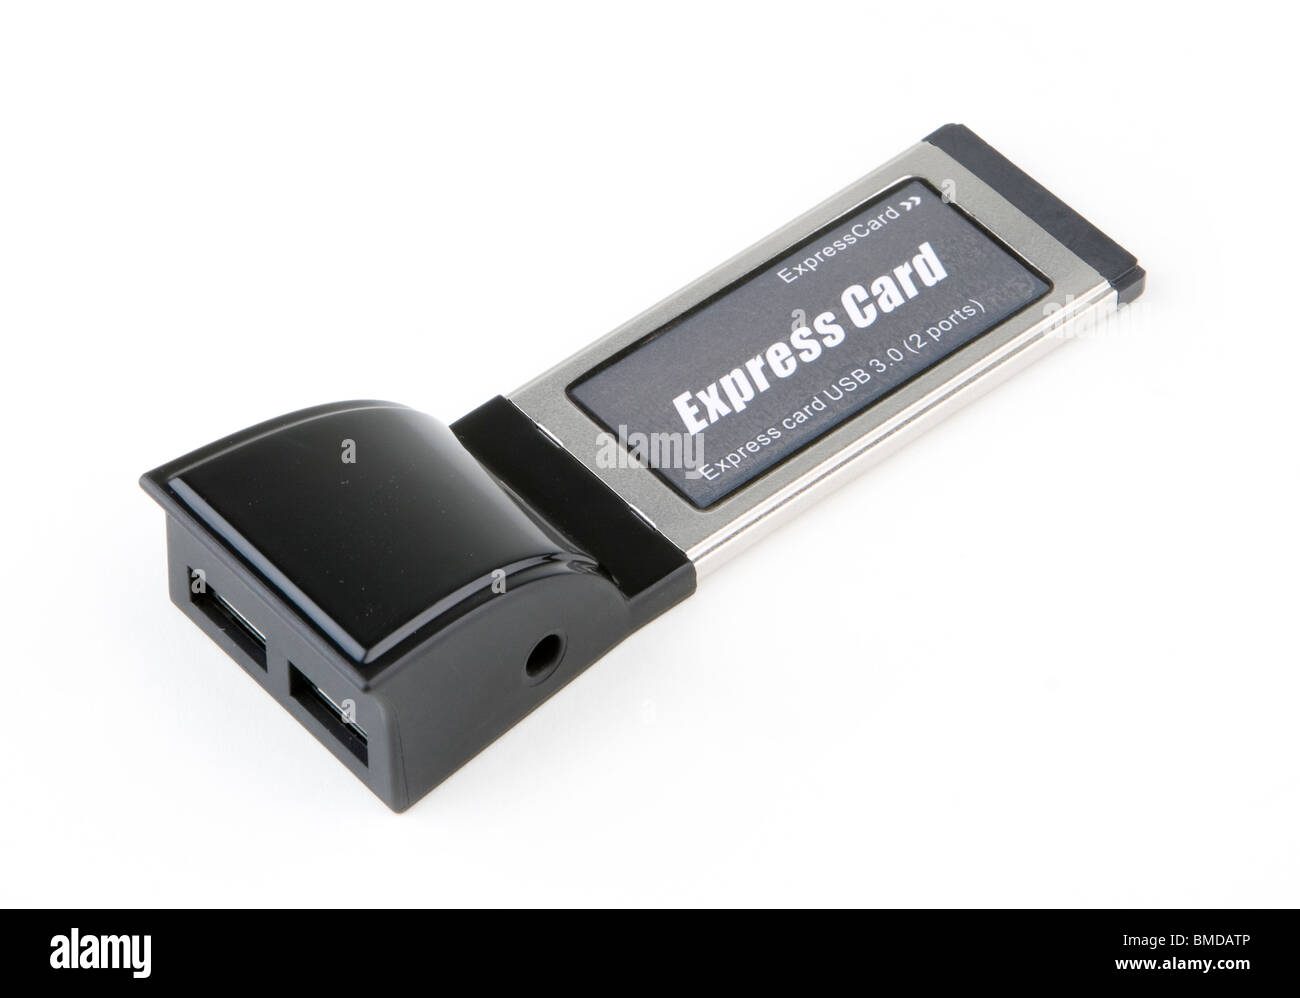 Express Card for notebook computer that provides two USB 3.0 ports Stock Photo